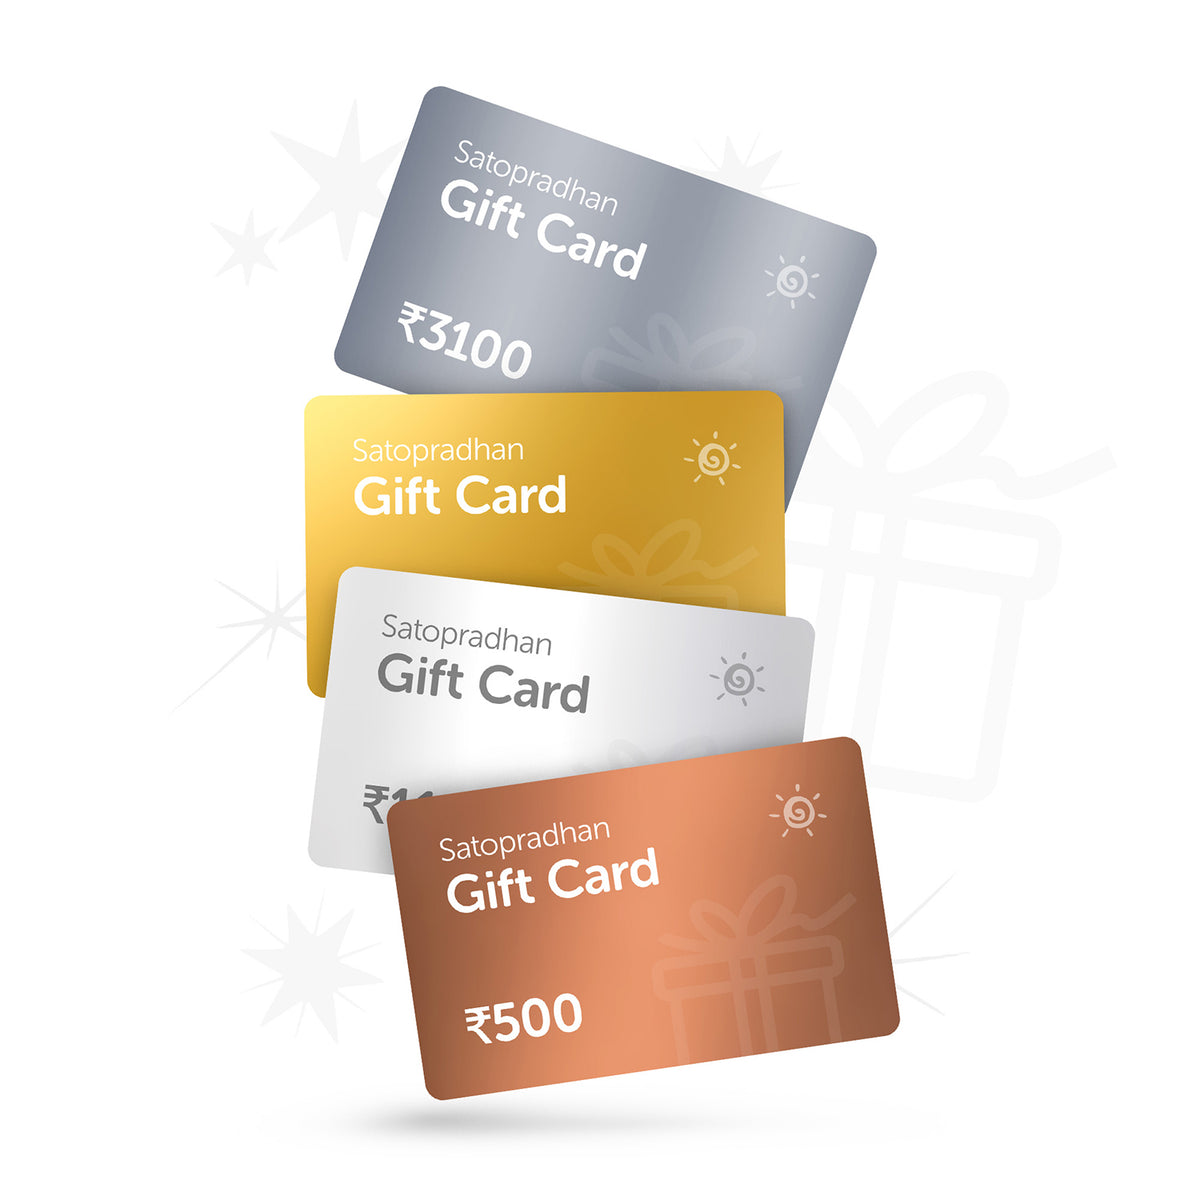 Satopradhan Gift Card - Simplify Gifting with Gift Voucher